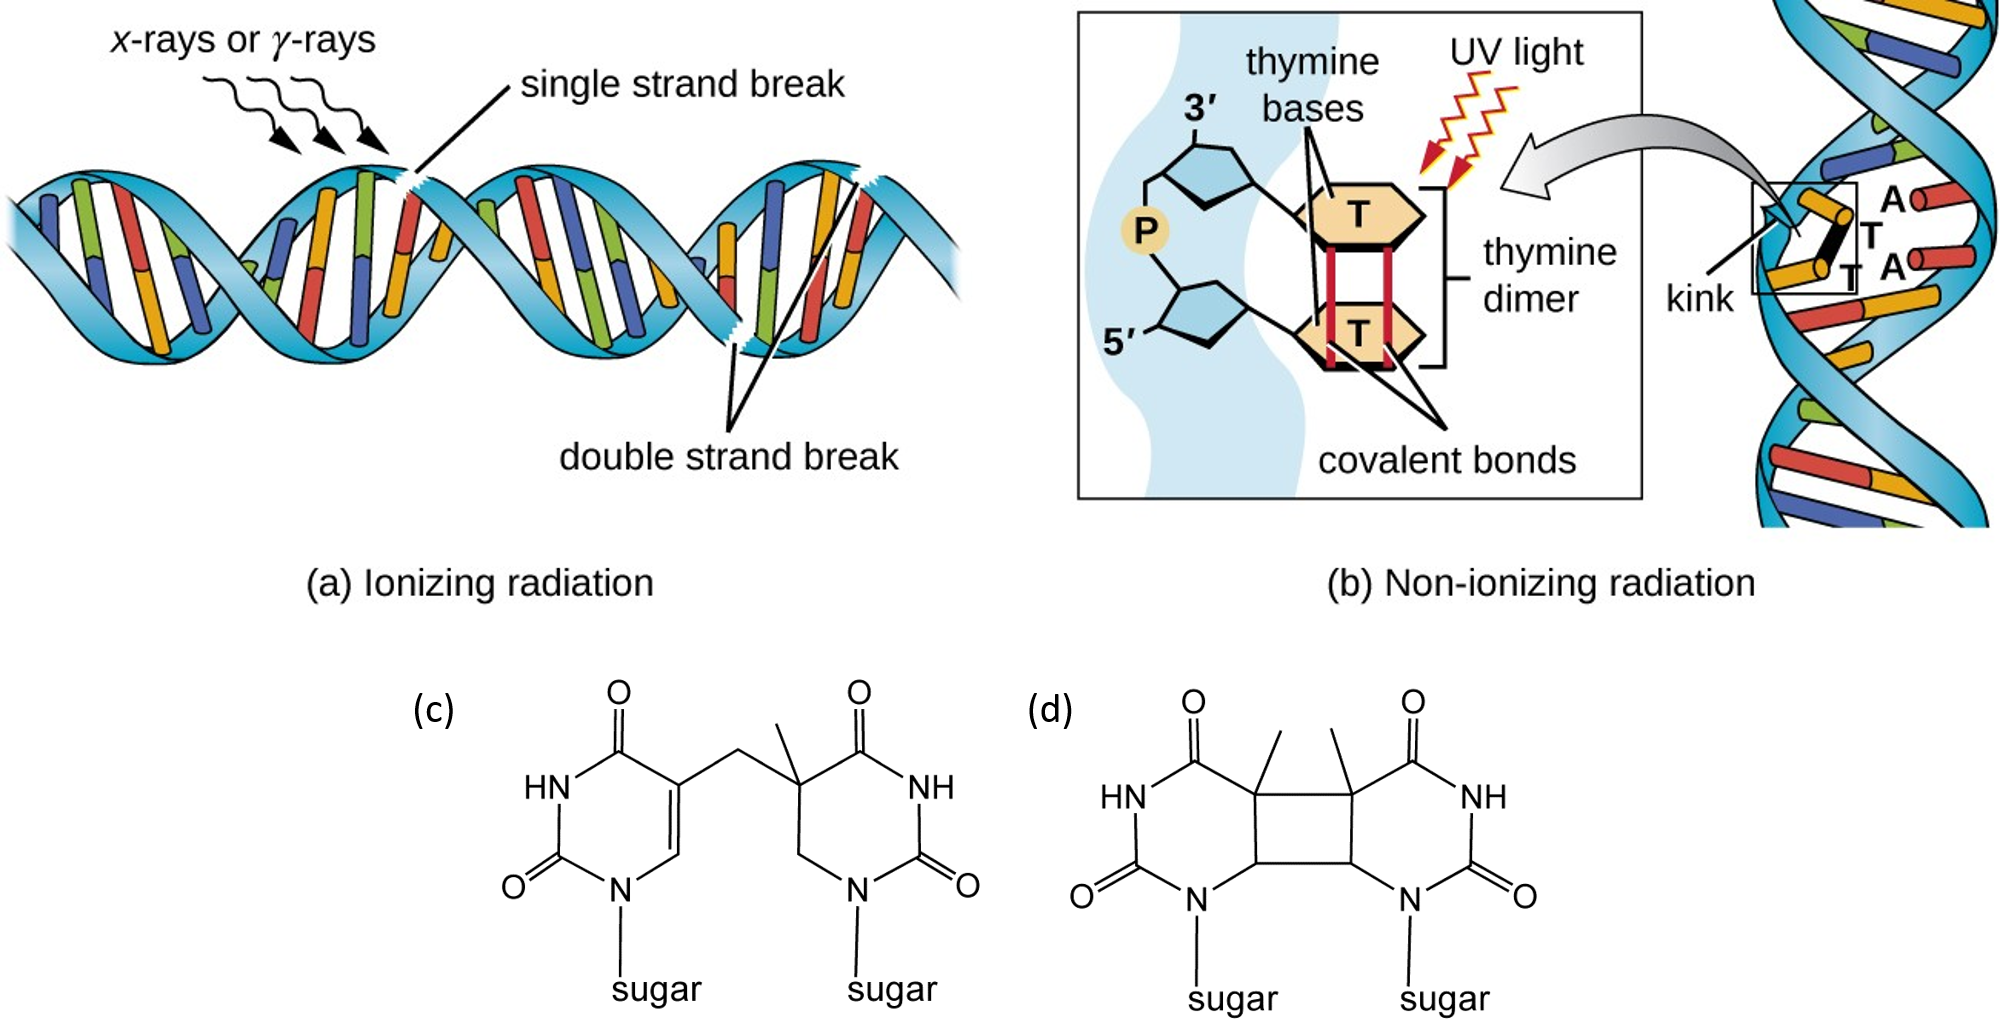 A protein with a dual role: Both repair and mutation